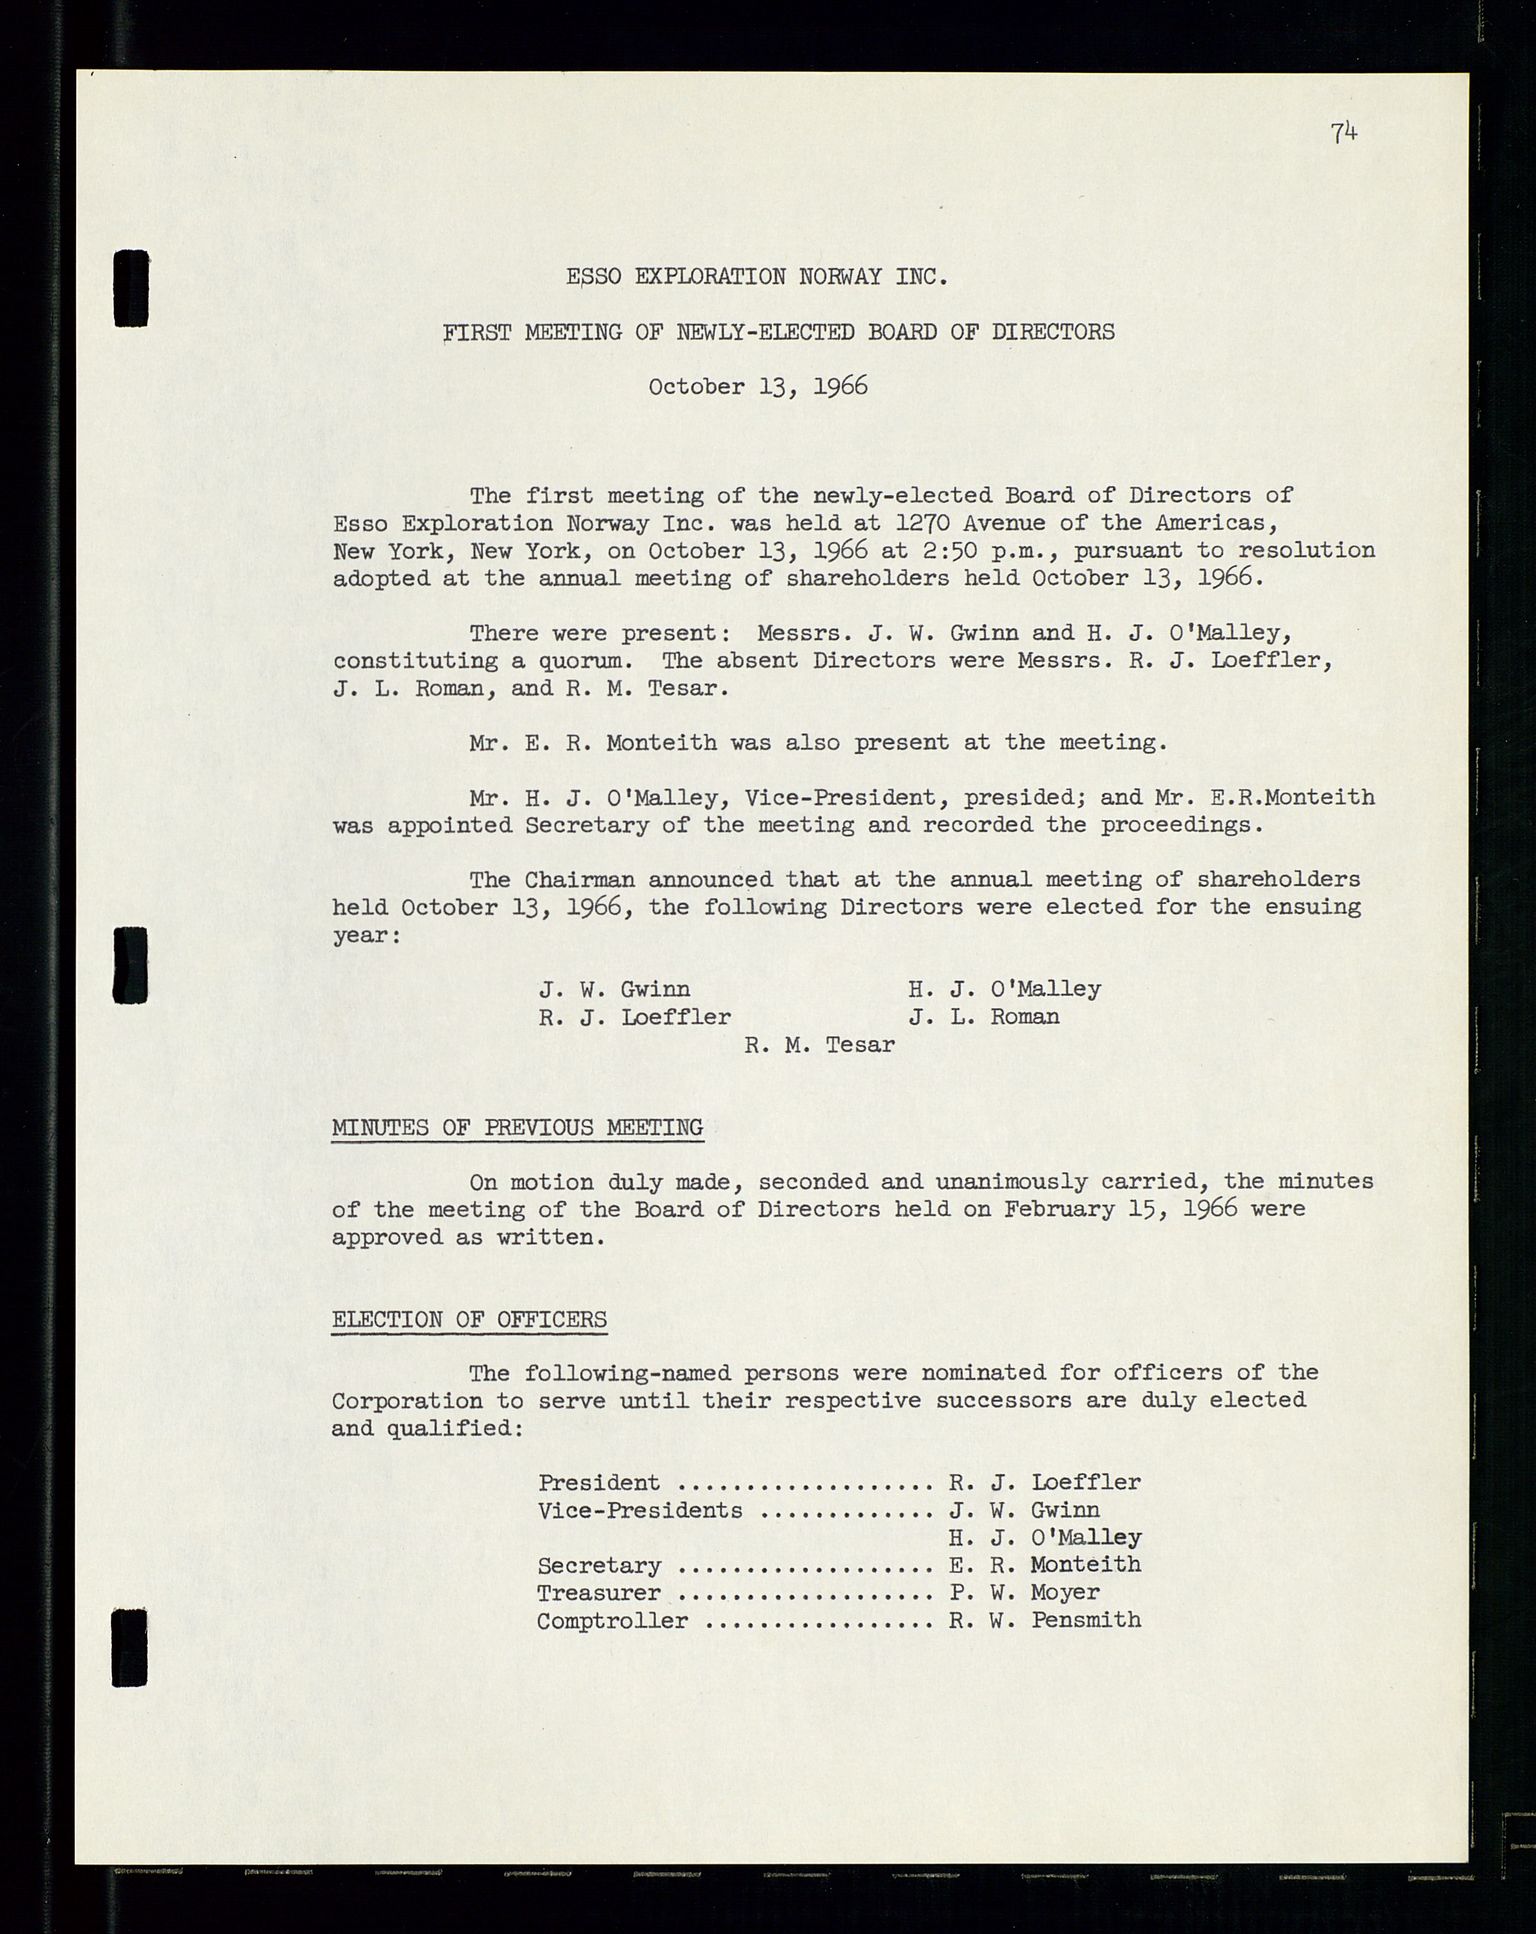 Pa 1512 - Esso Exploration and Production Norway Inc., SAST/A-101917/A/Aa/L0001/0001: Styredokumenter / Corporate records, By-Laws, Board meeting minutes, Incorporations, 1965-1975, p. 74